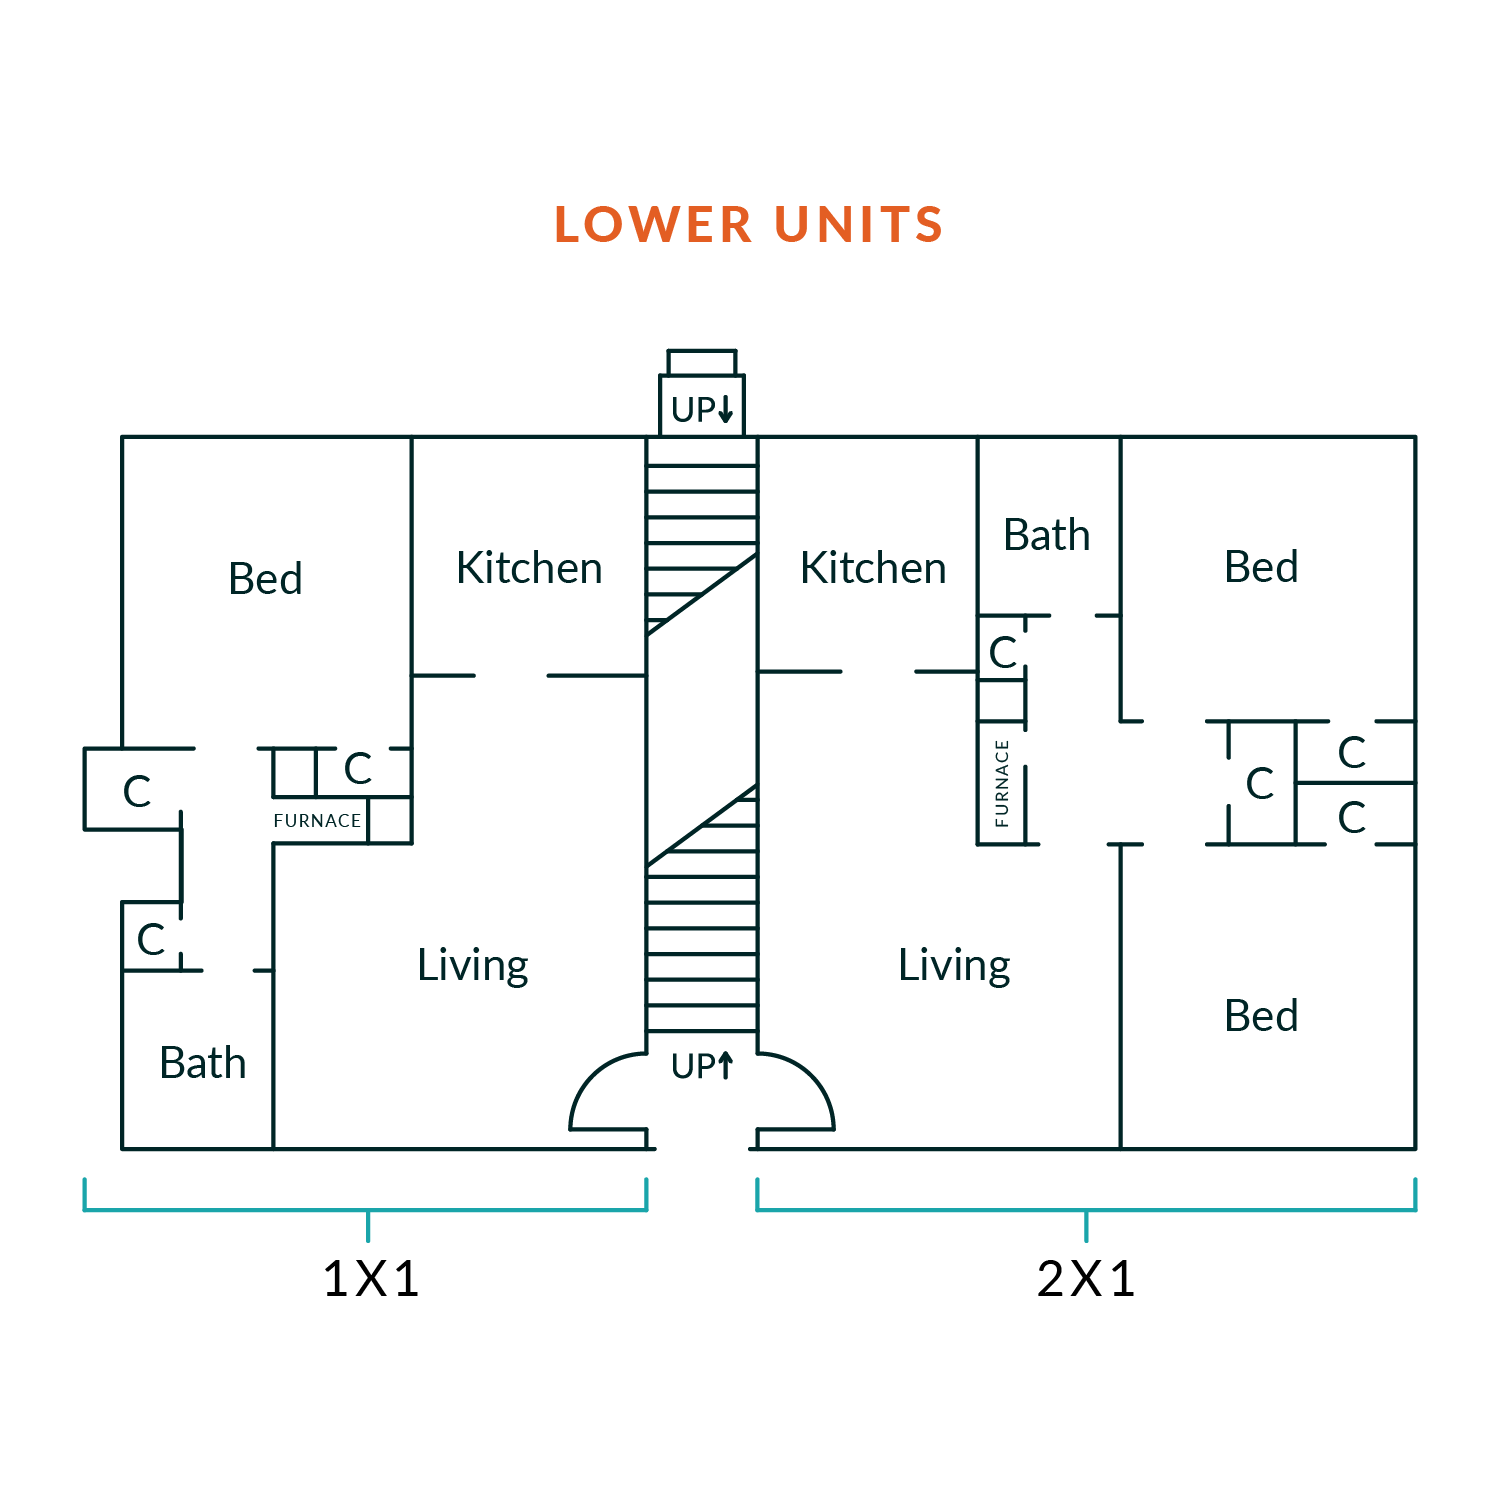 The Courtyard @ 1161 Poplar floor plans_Lower units.png